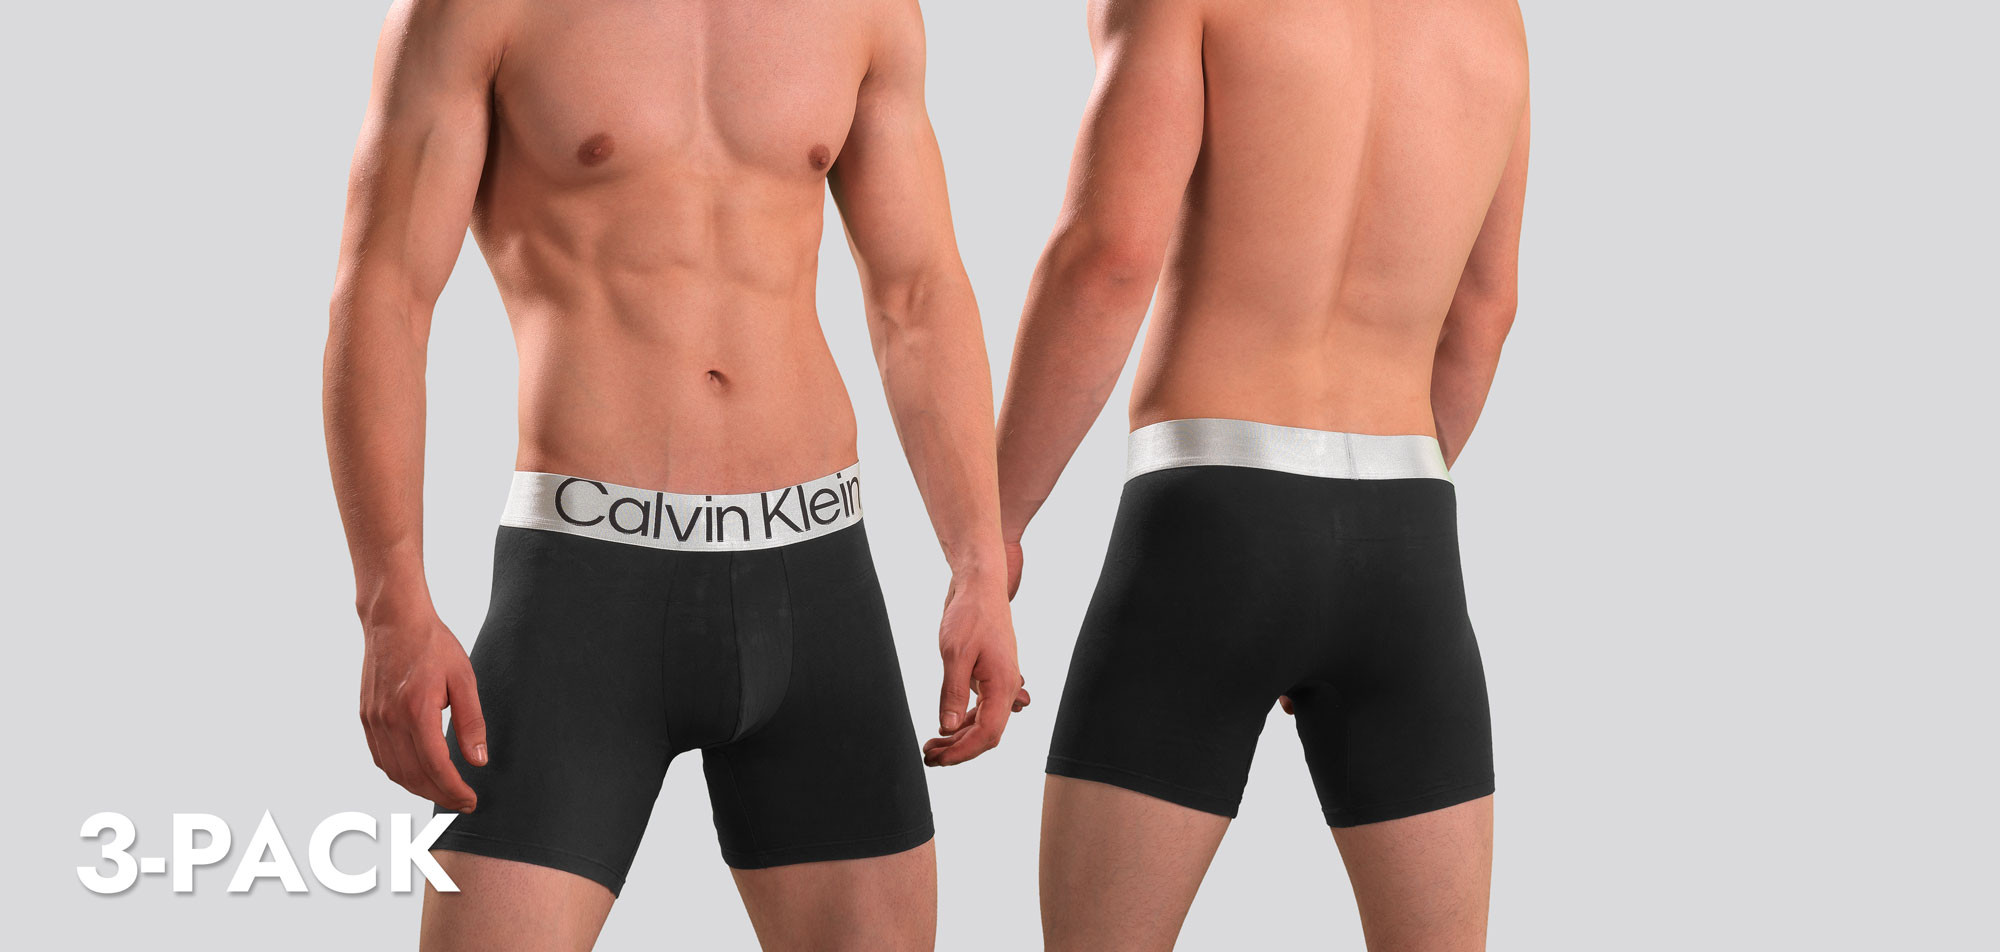 Calvin Klein Boxer Brief 3-Pack NB3131A Reconsidered Steel, color Nee